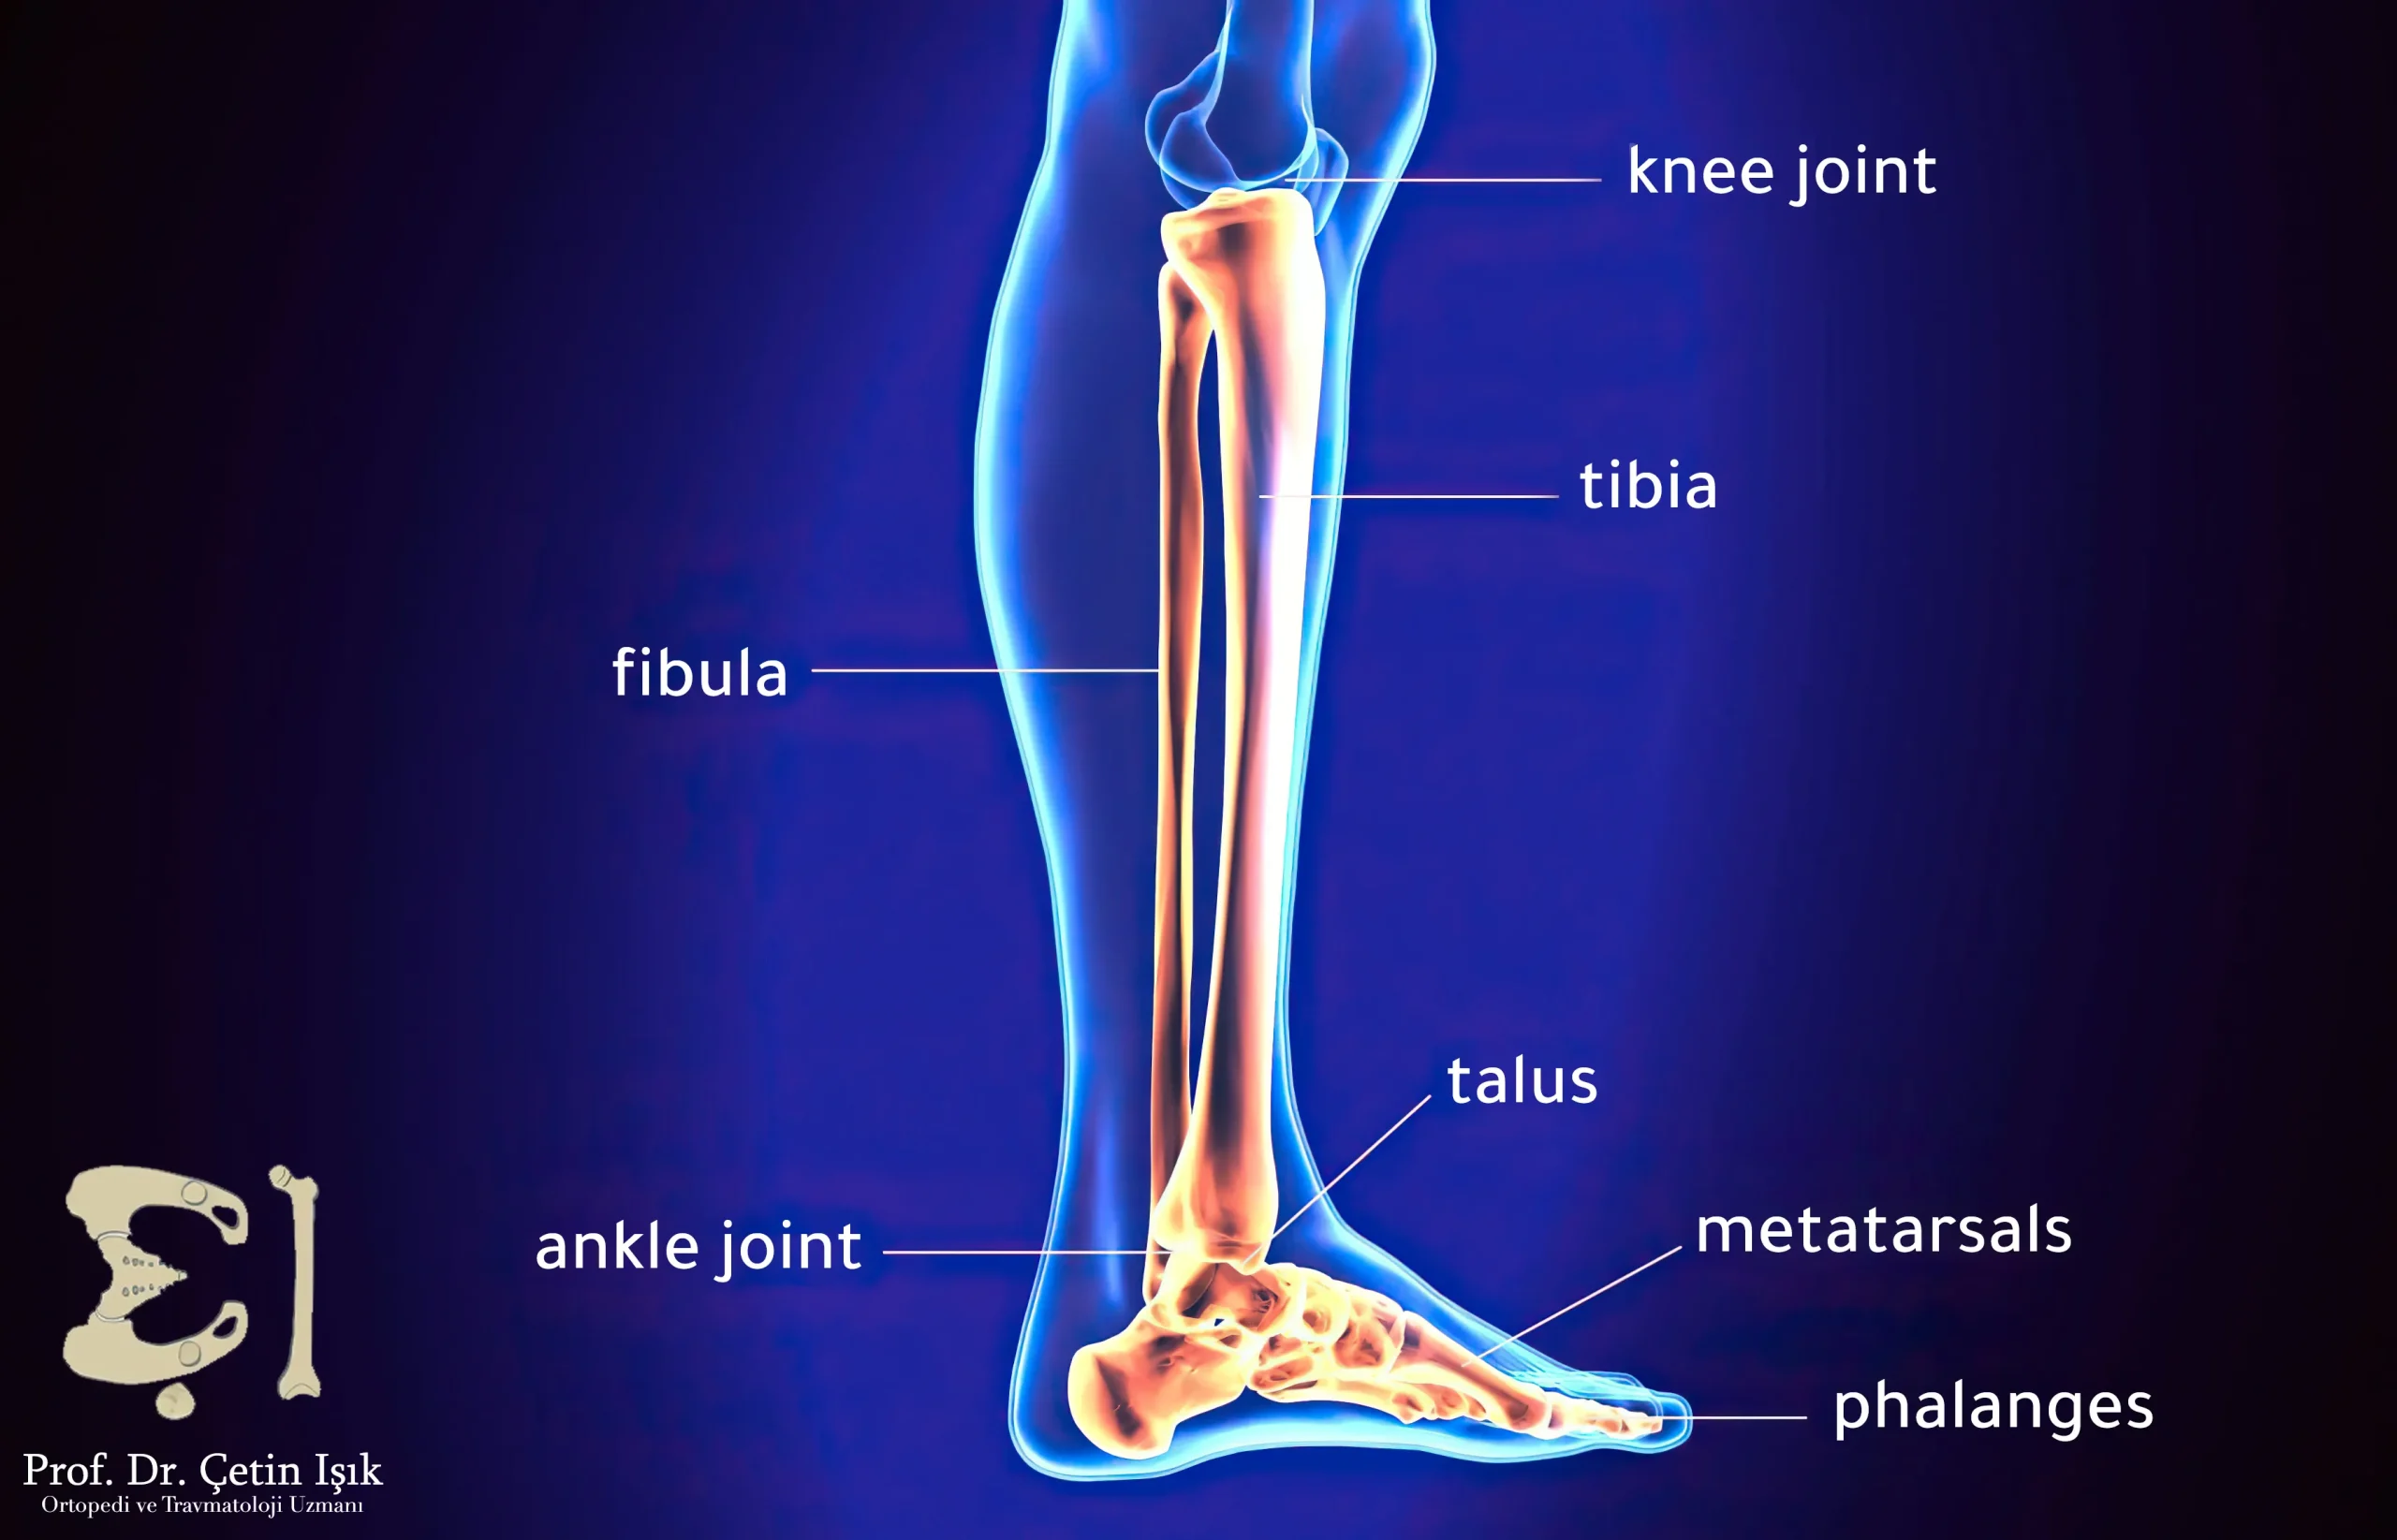 The leg consists of the tibia bone and the fibula bone, where the tarsal bones are located at the bottom of the shin bones in the ankle joint, and the knee joint is located at the top of the shin bones